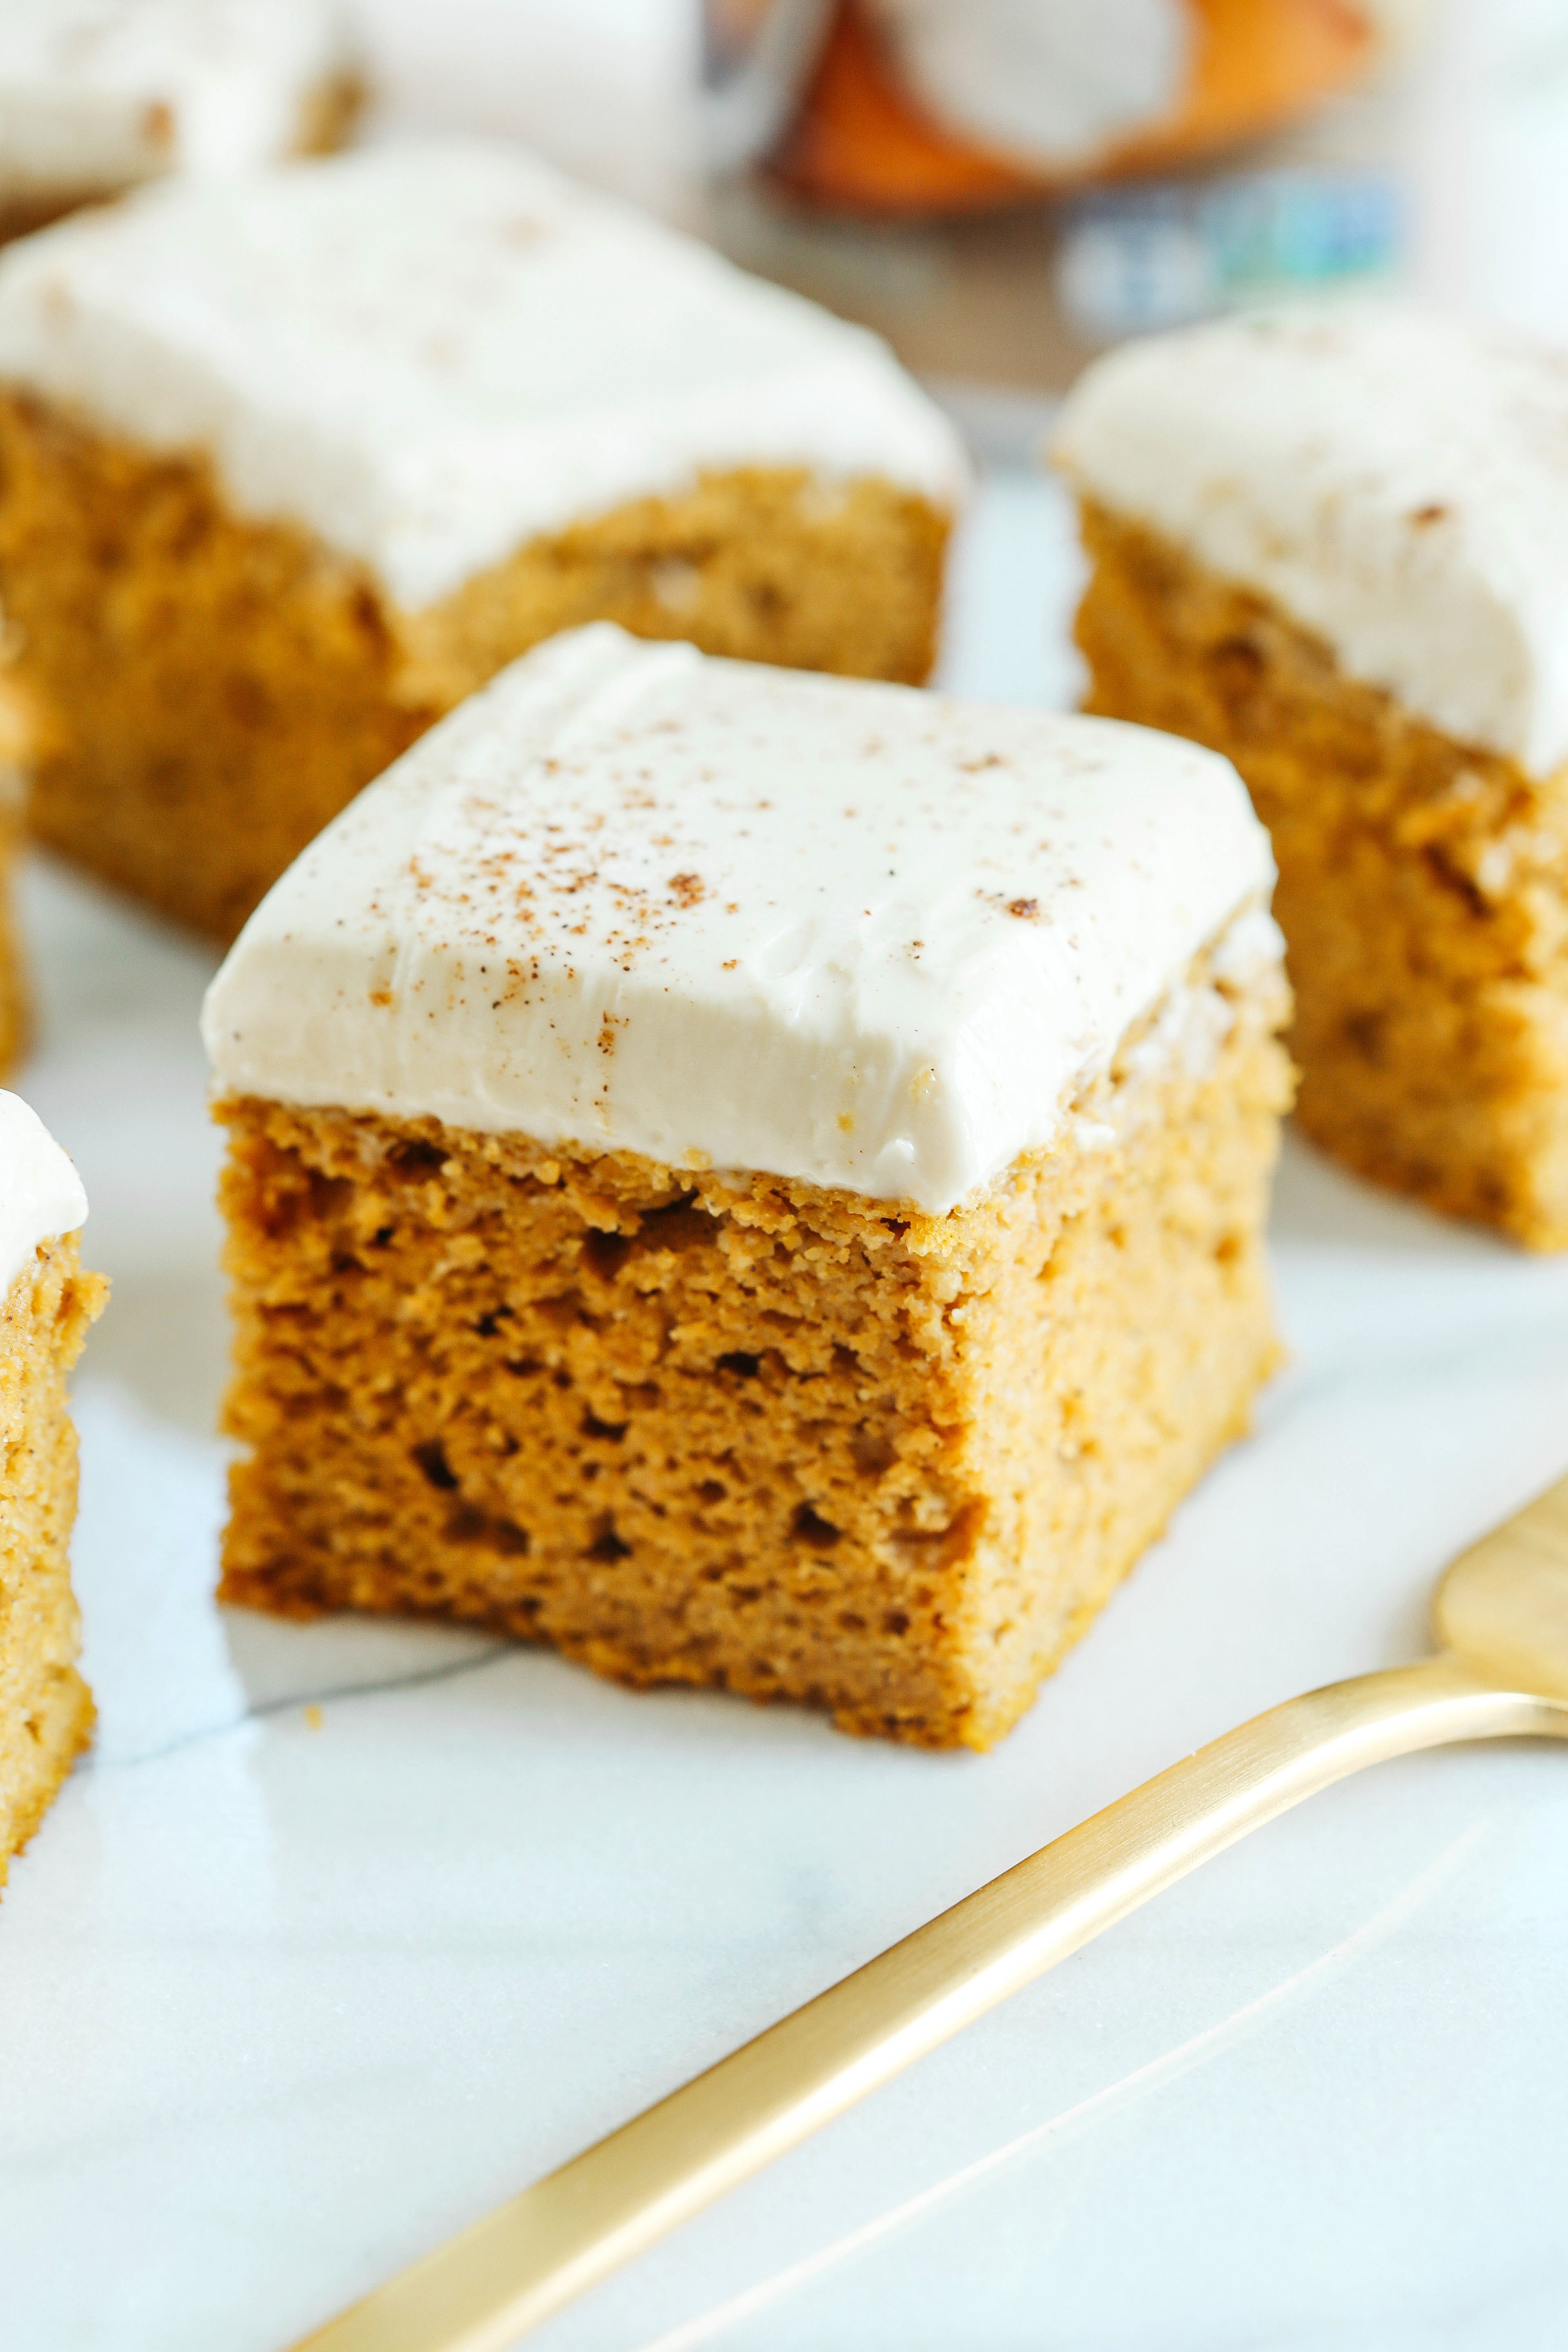 Pumpkin Bars Without Cream Cheese Frosting